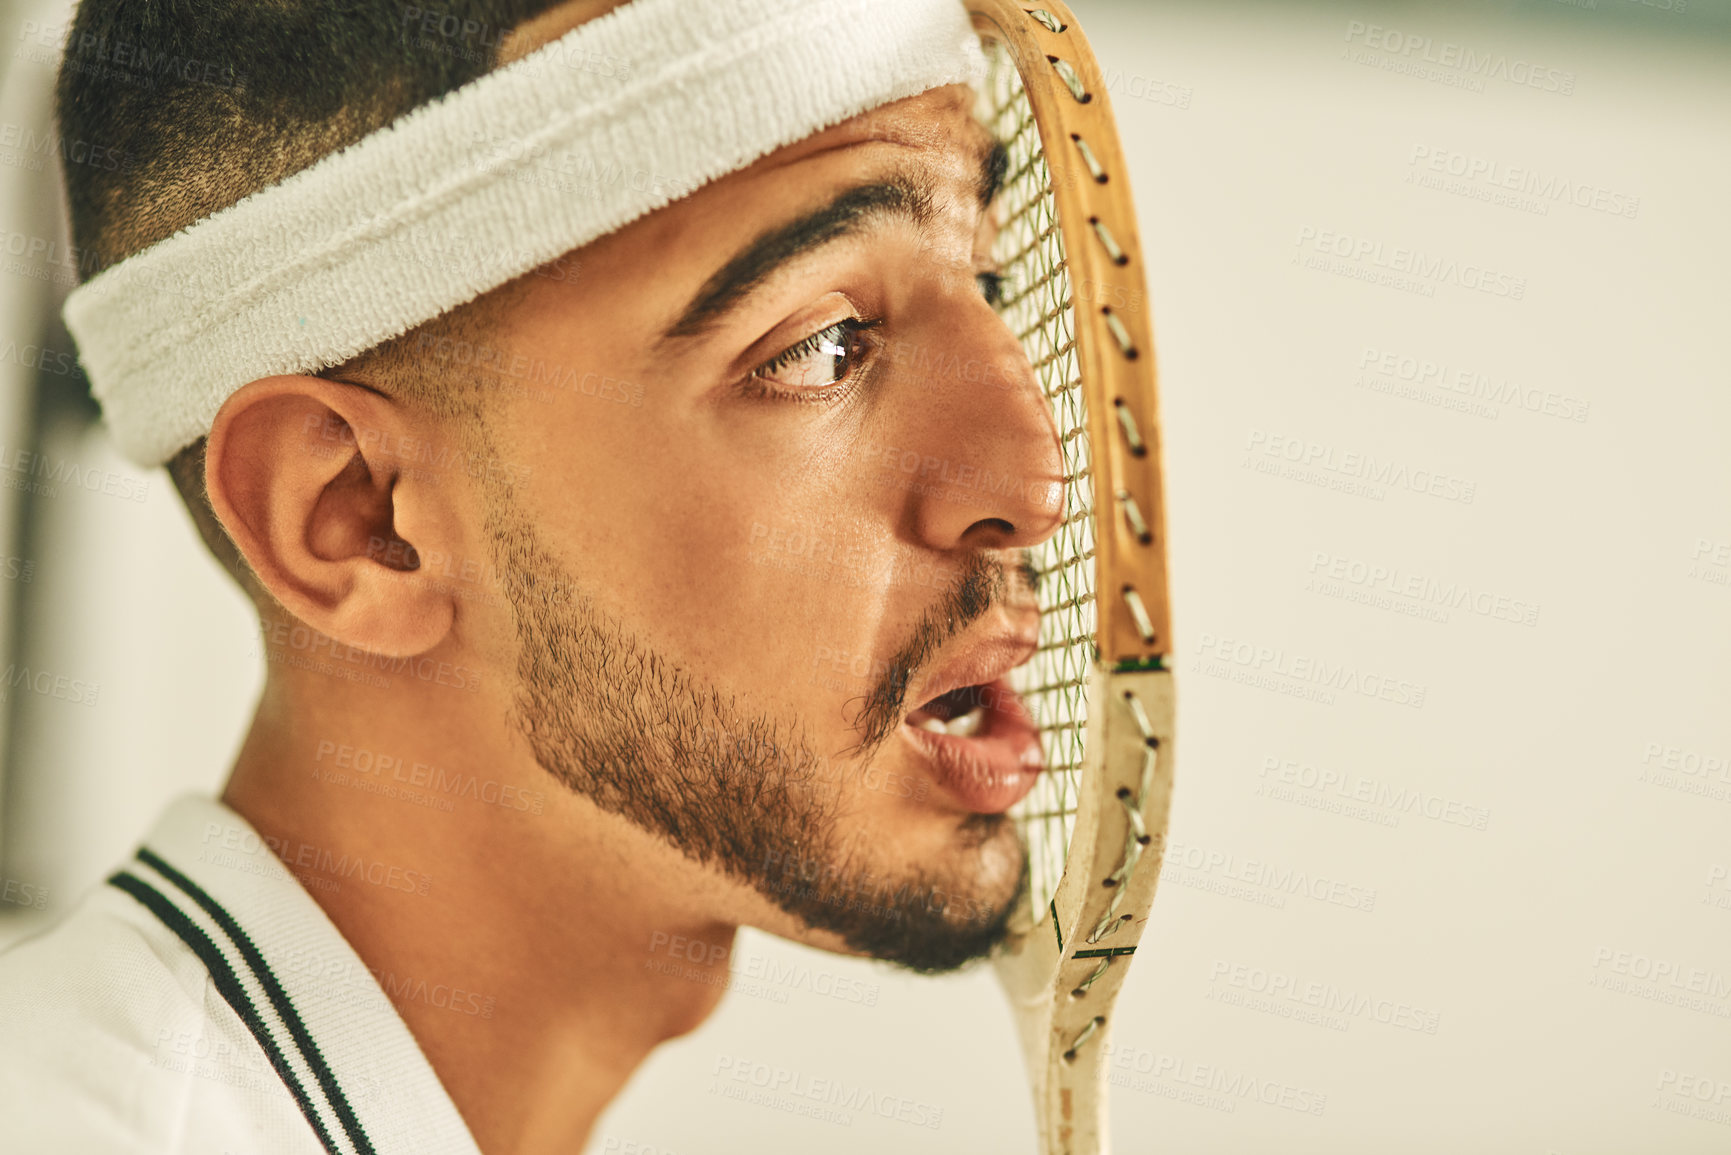 Buy stock photo Shot of a young man pressing his face up against his squash racket